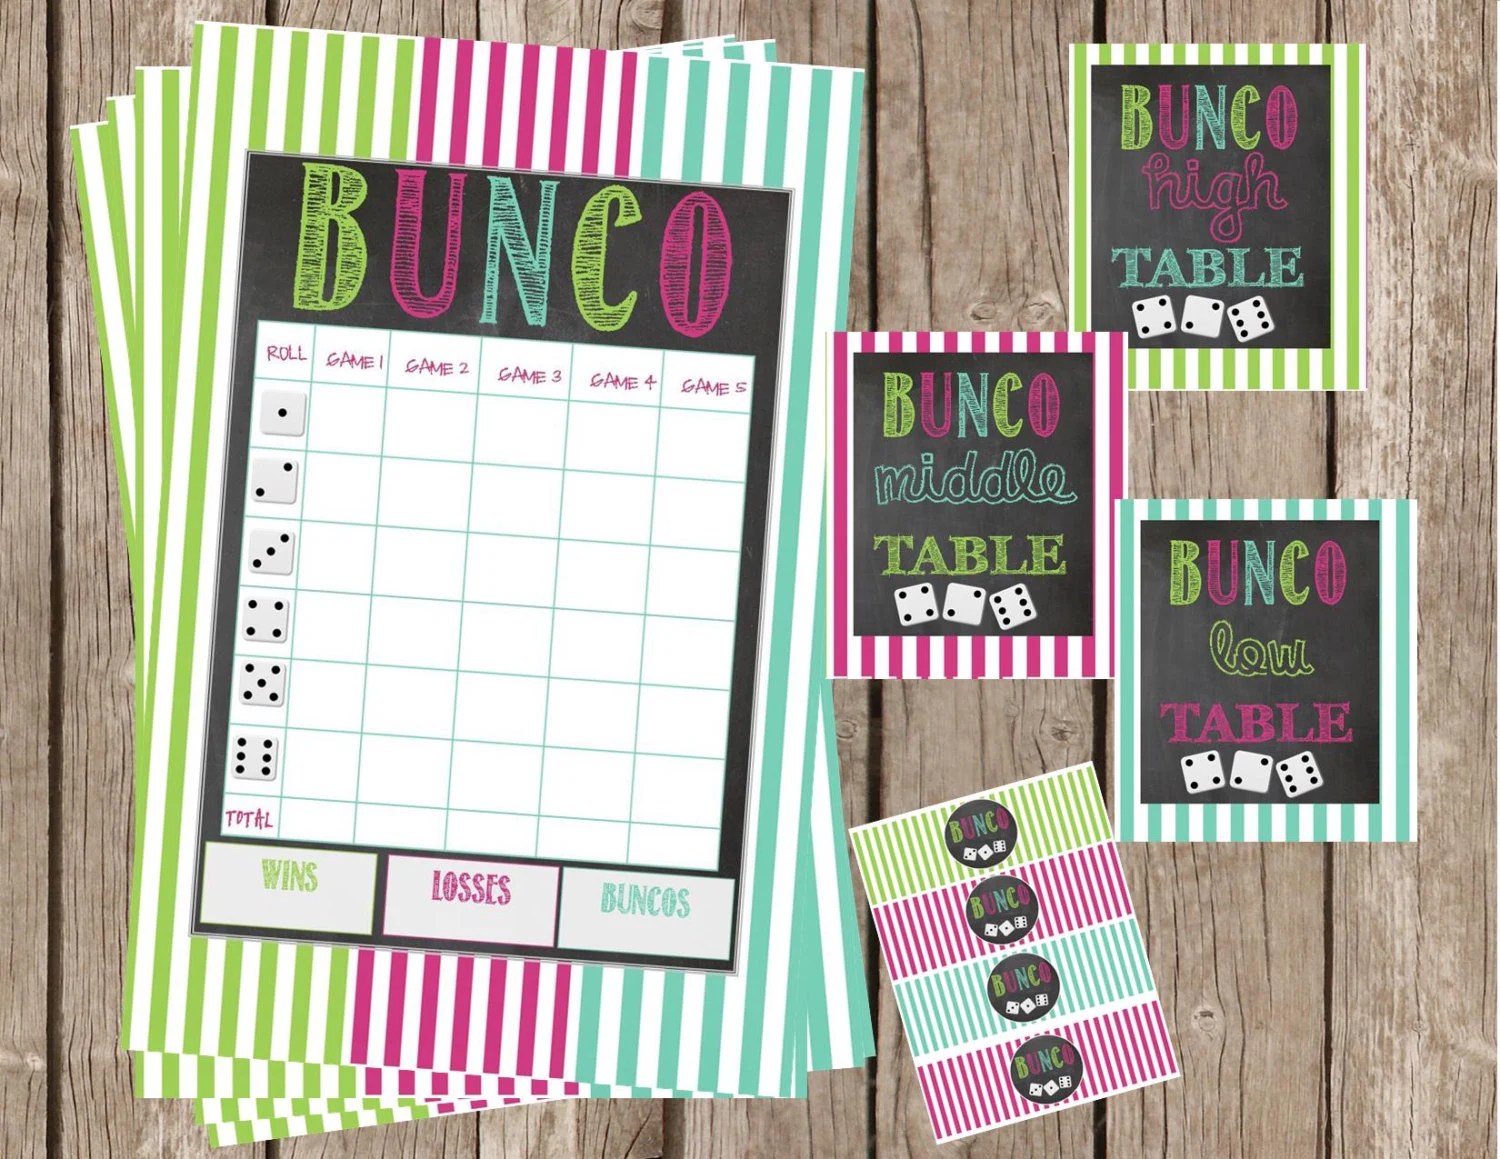 For your references, there is another 26 Similar photographs of bunco rules ...